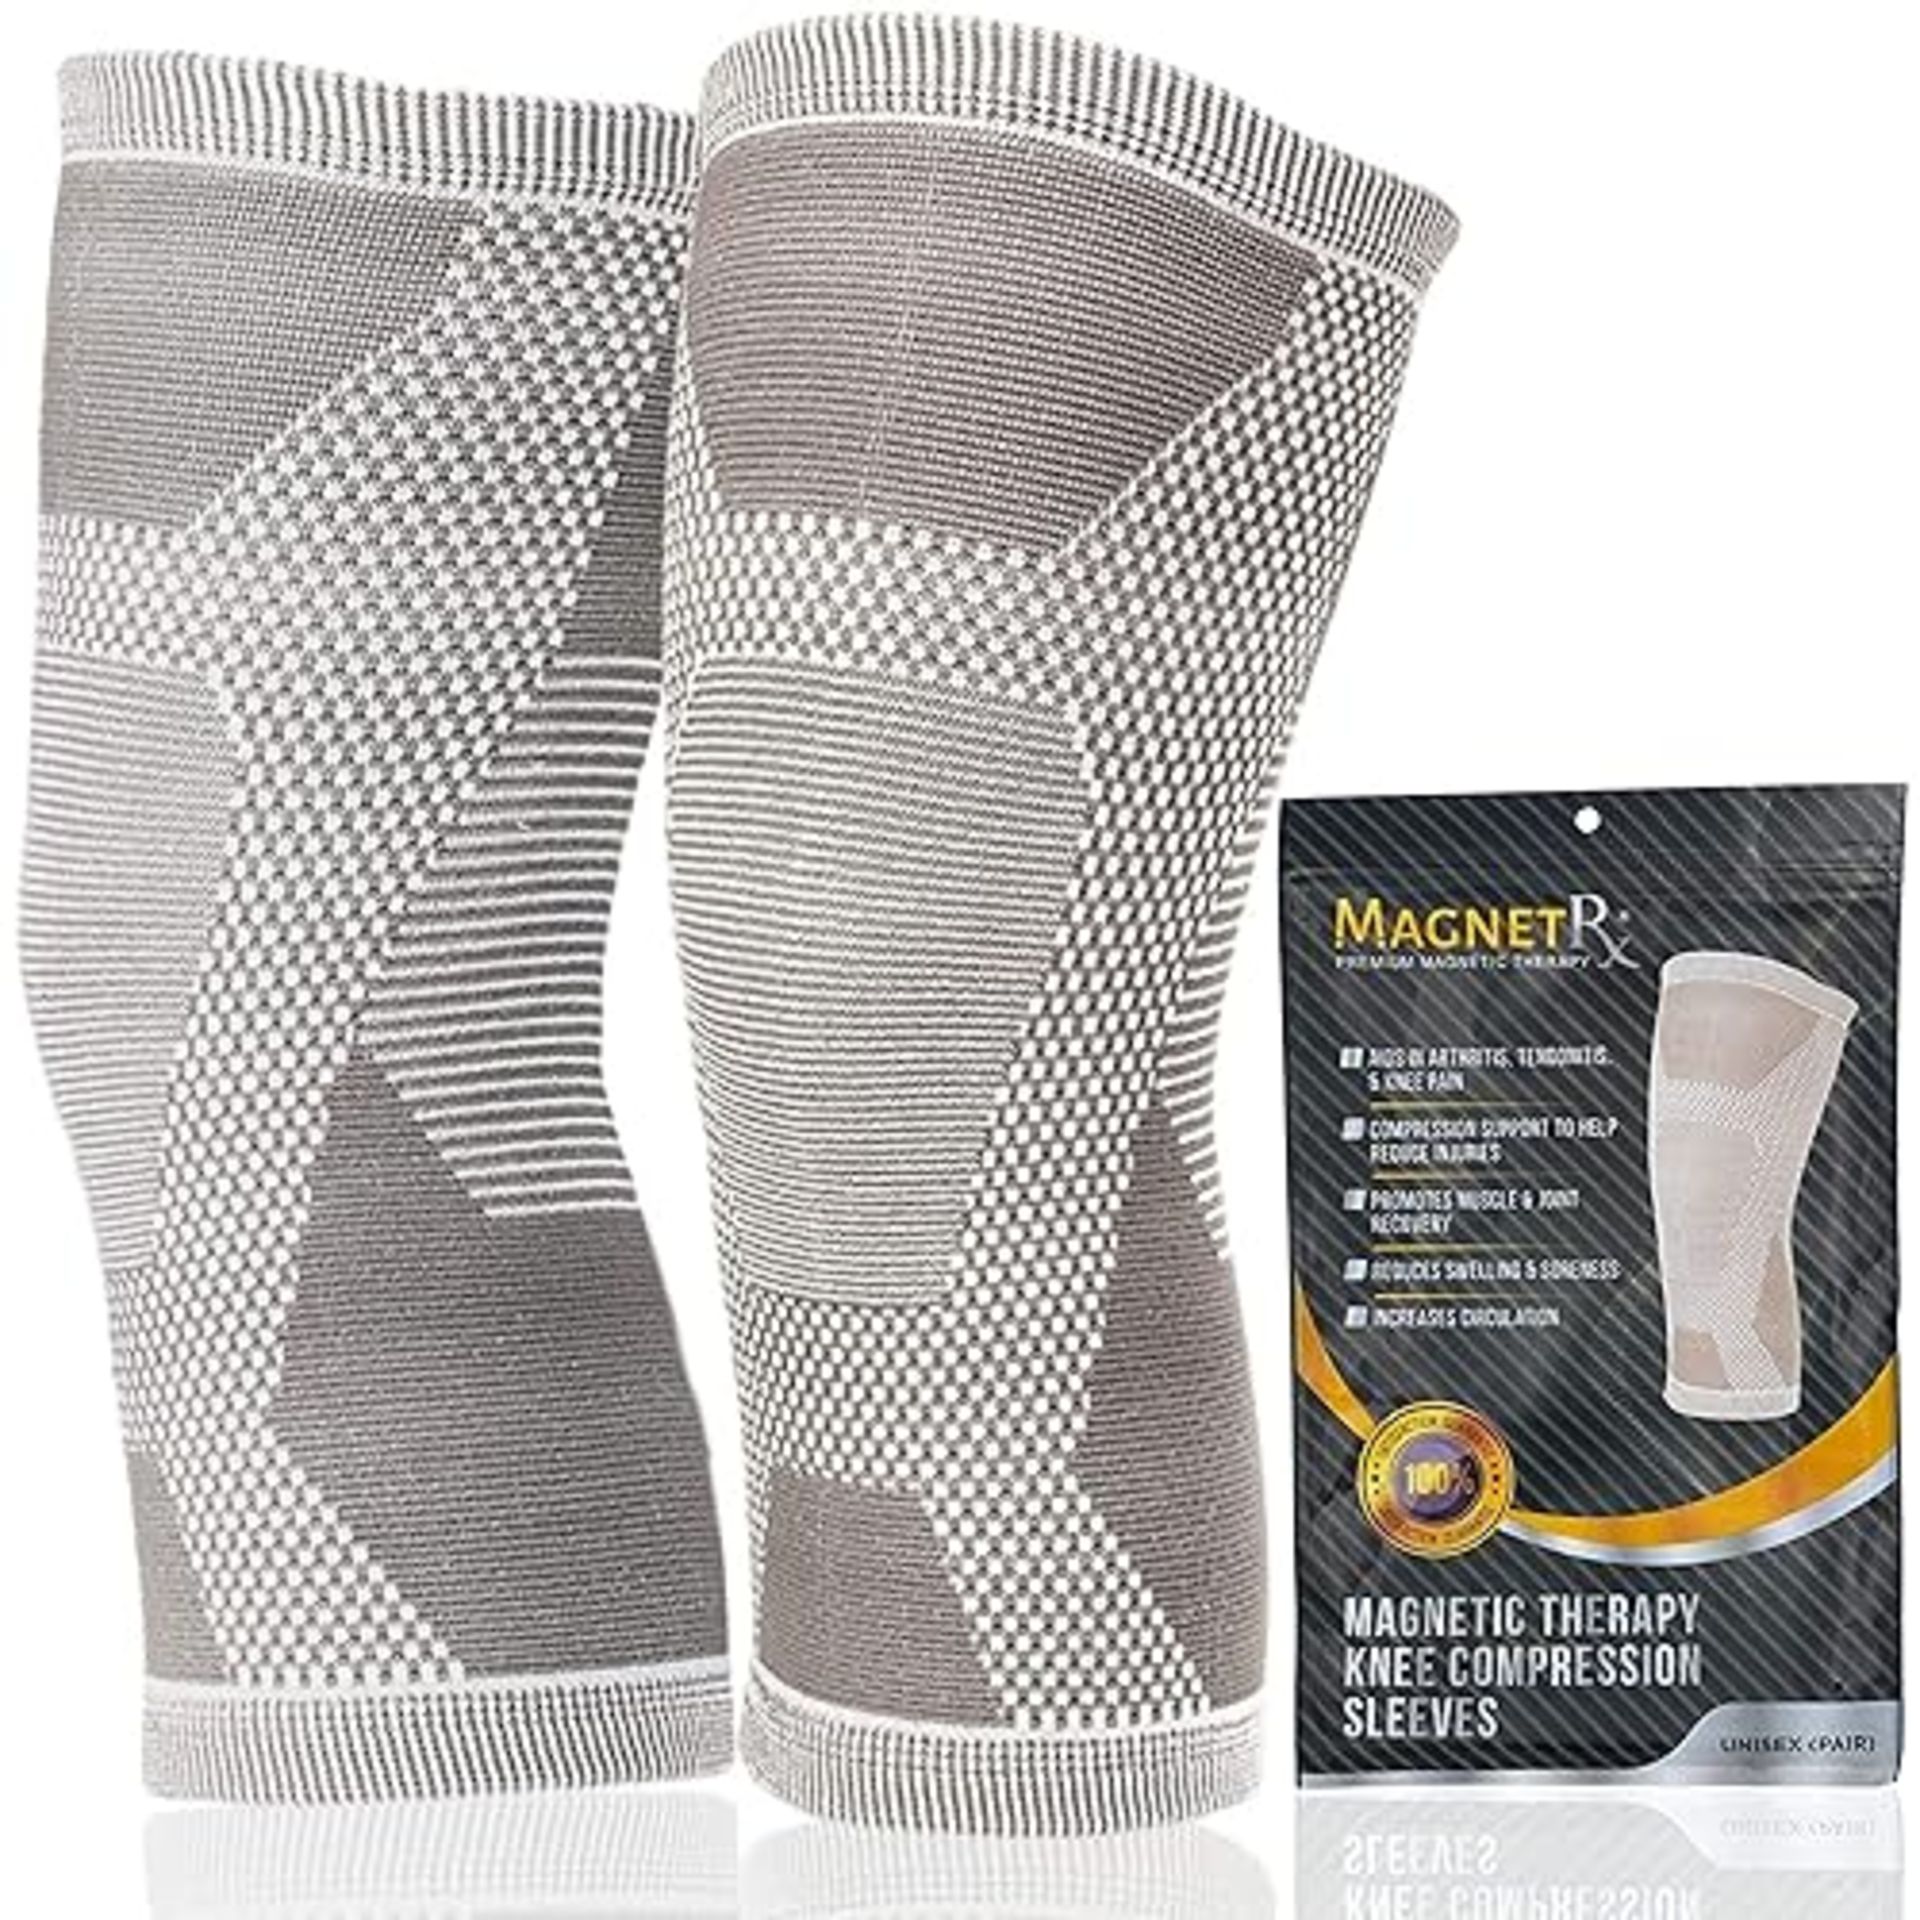 Magnetrx Magnetic Knee Compression Sleeve - (2-Pack) Knee Support With Magnets For Knee Comfort &...